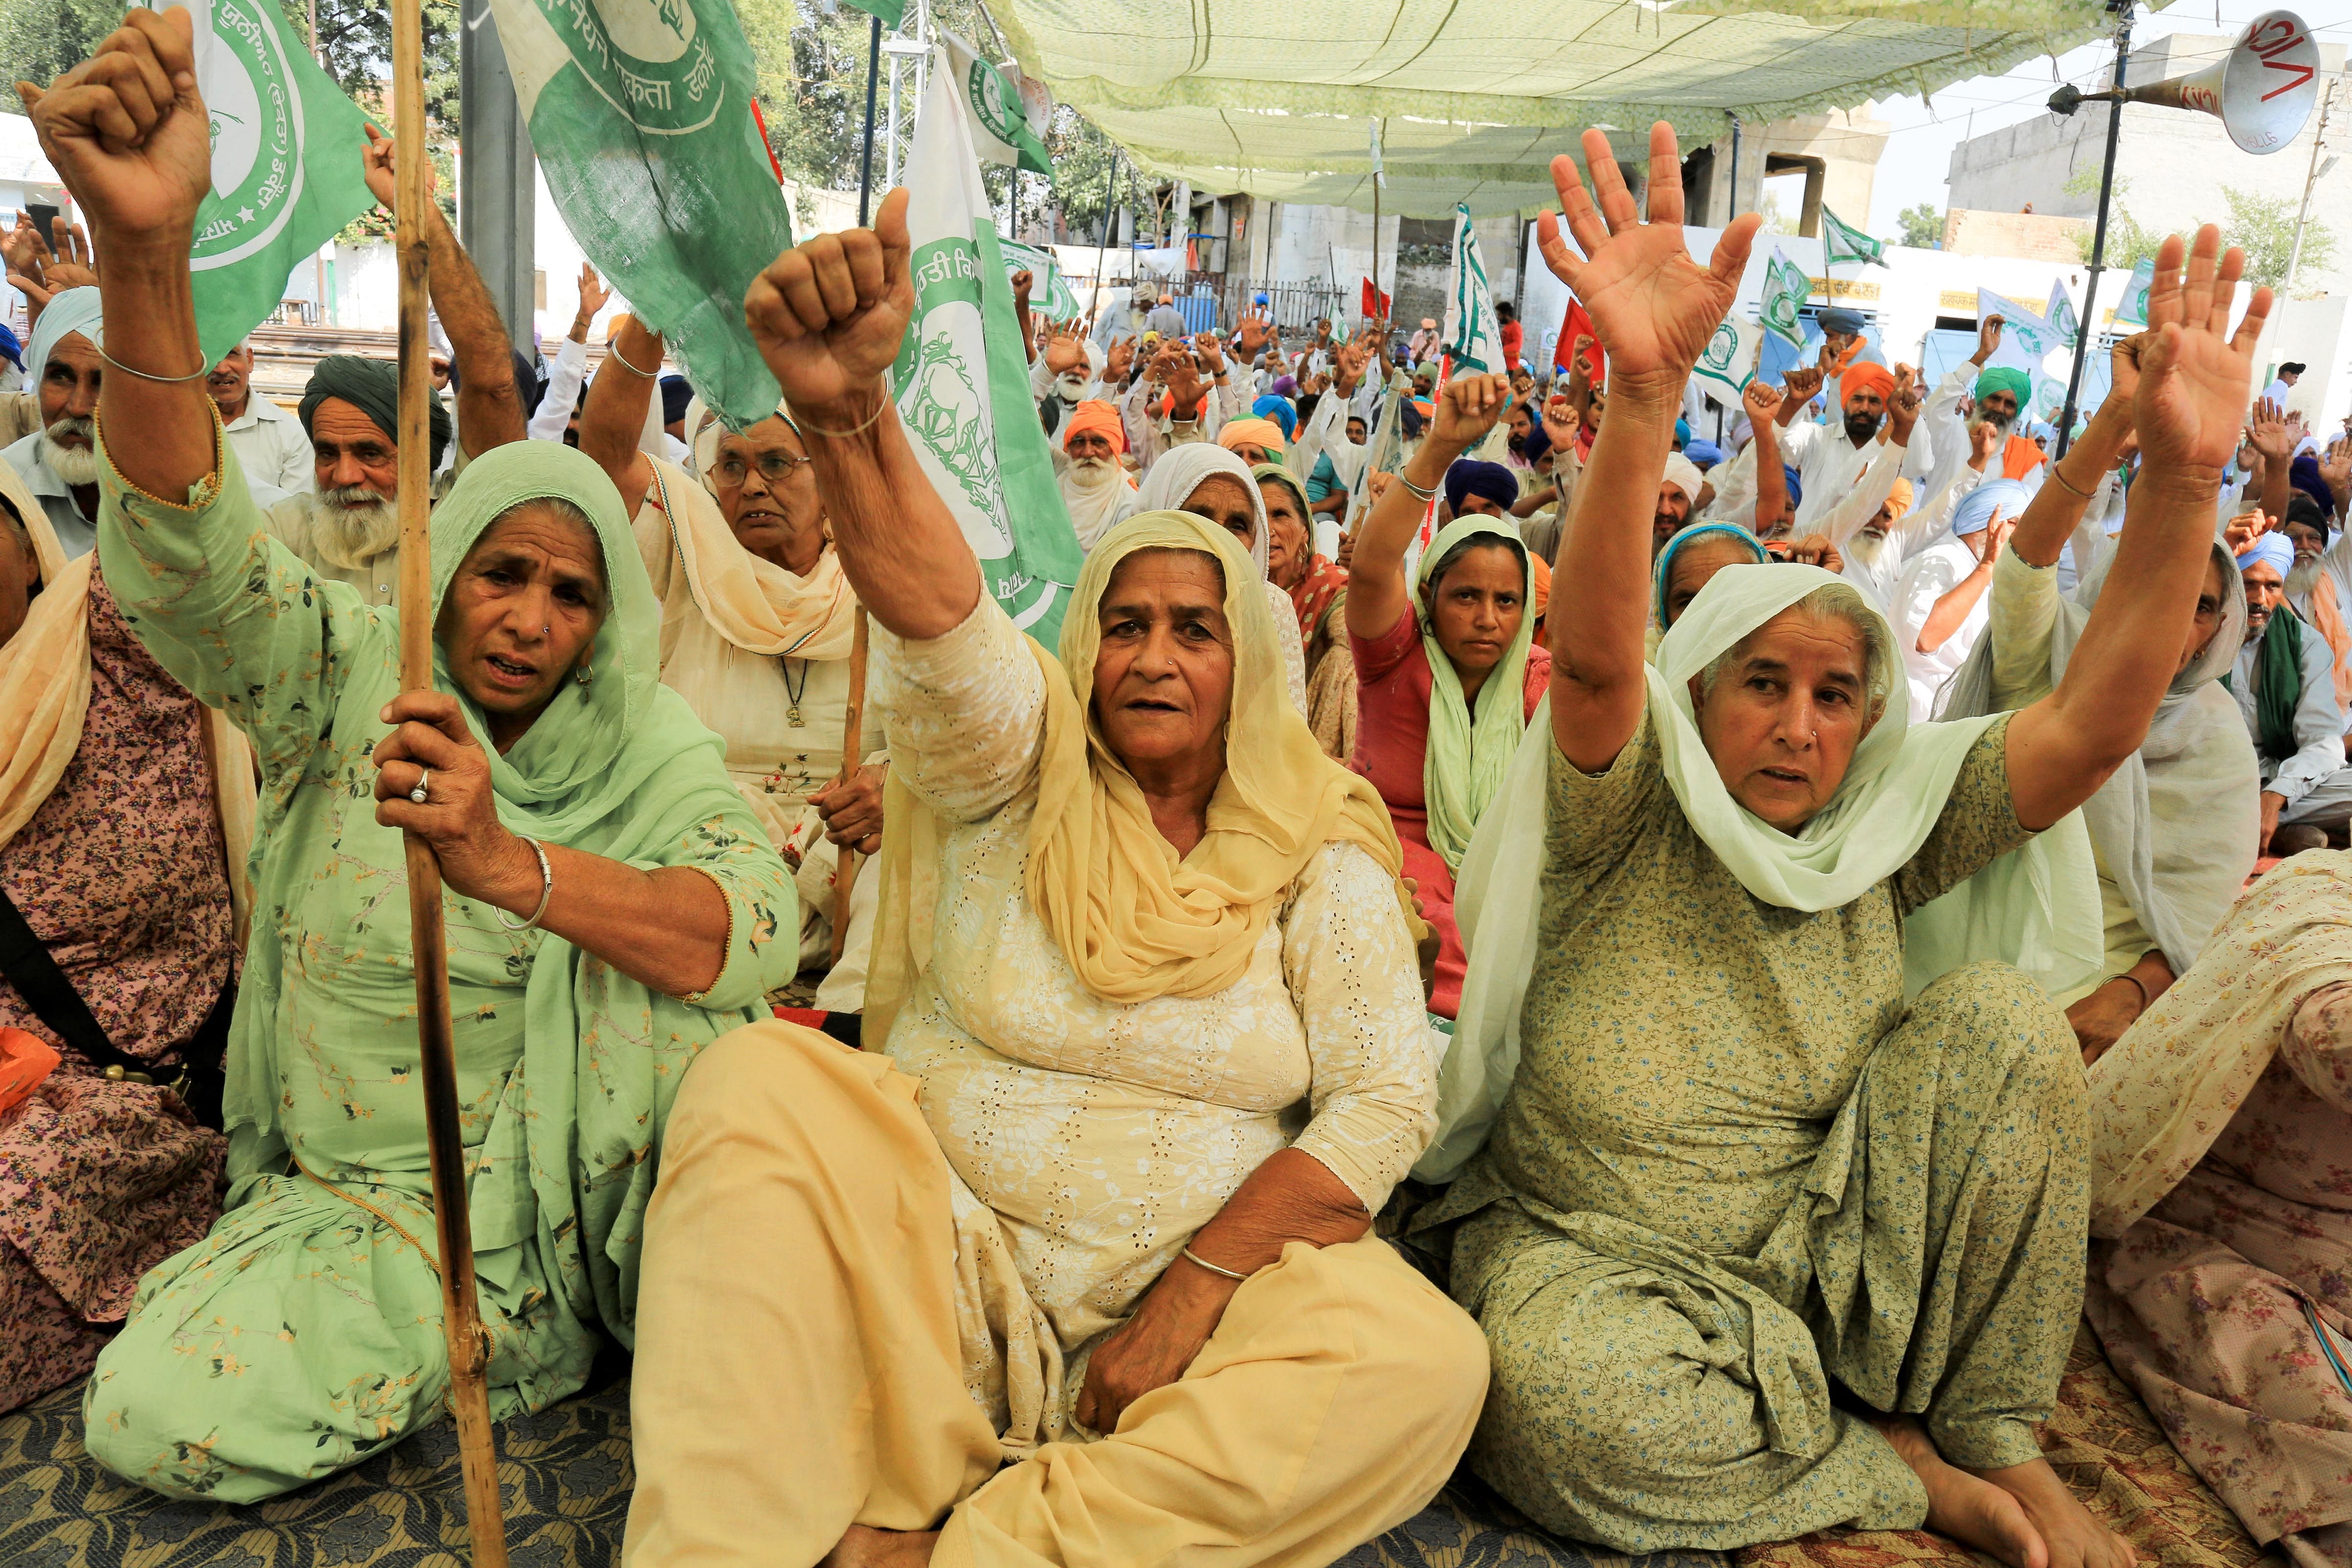 Women raise slogans during their protest against the farm laws in Bathinda, Friday, Oct. 16, 2020. Credit: PTI Photo